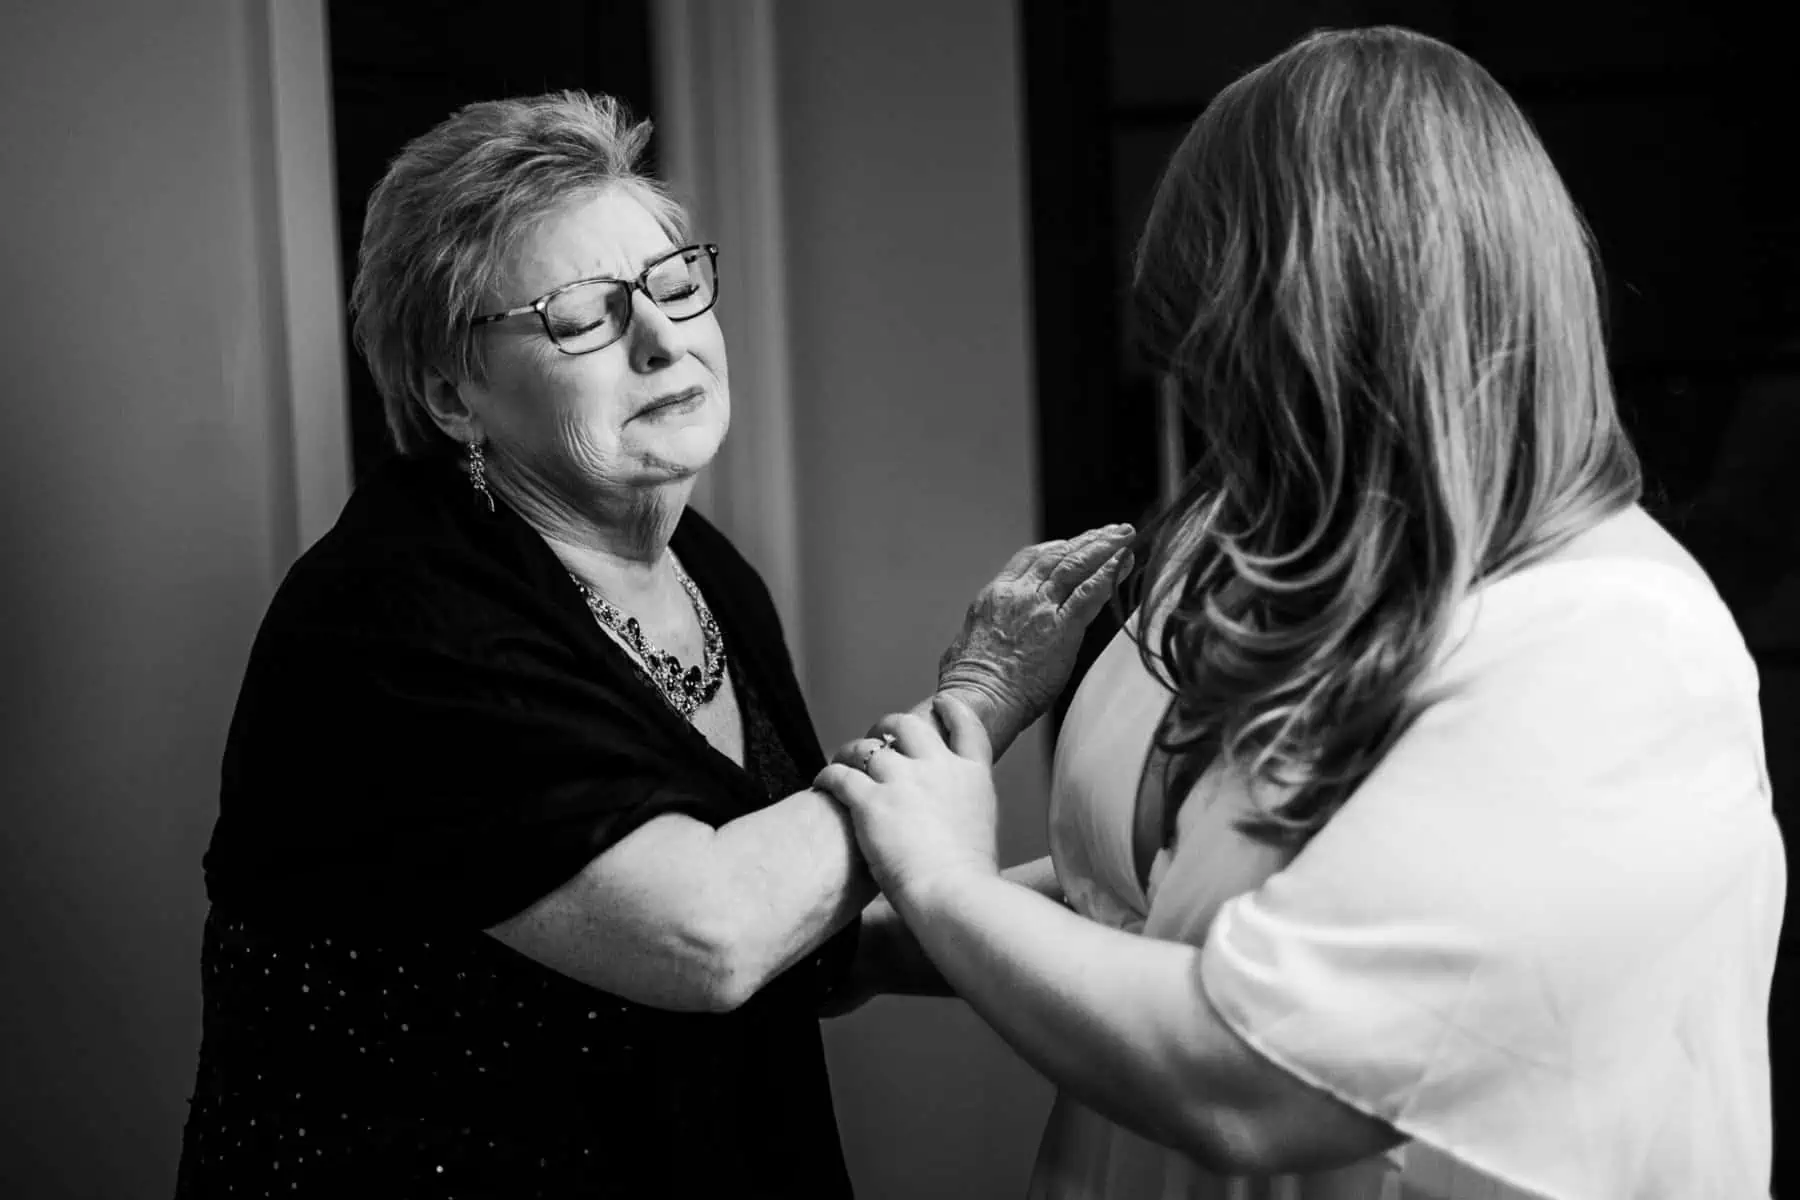 A black and white photo of an older woman helping a younger woman.